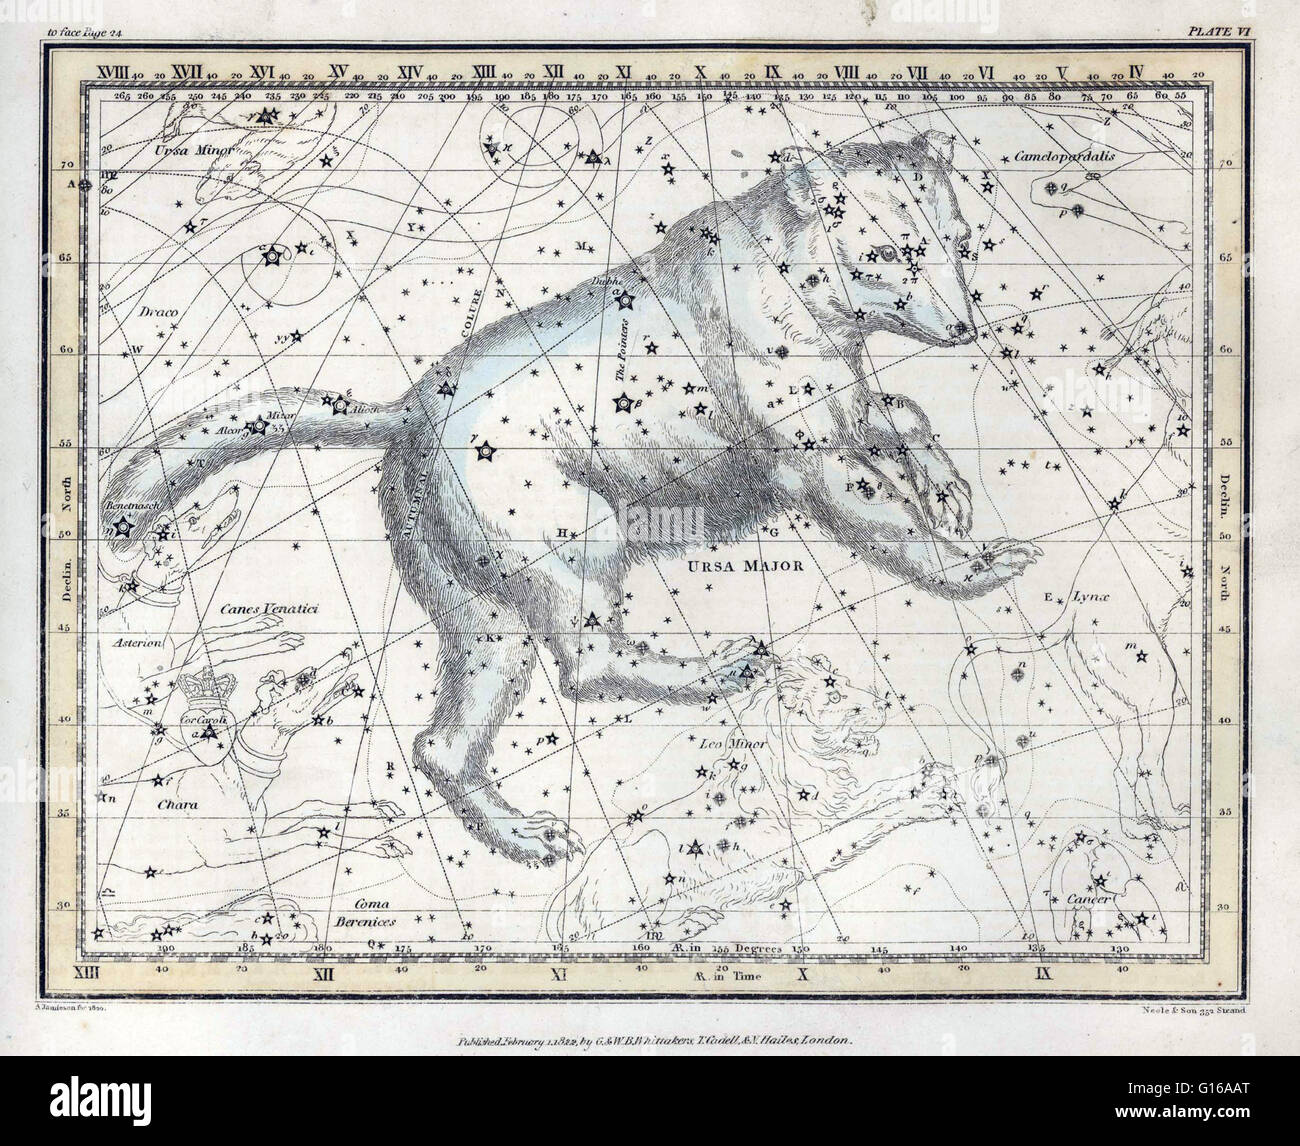 Ursa Major, also known as the Great Bear, is a constellation visible throughout the year in most of the northern hemisphere. It was one of the 48 constellations listed by the 2nd century astronomer Ptolemy, and remains one of the 88 modern constellations Stock Photo